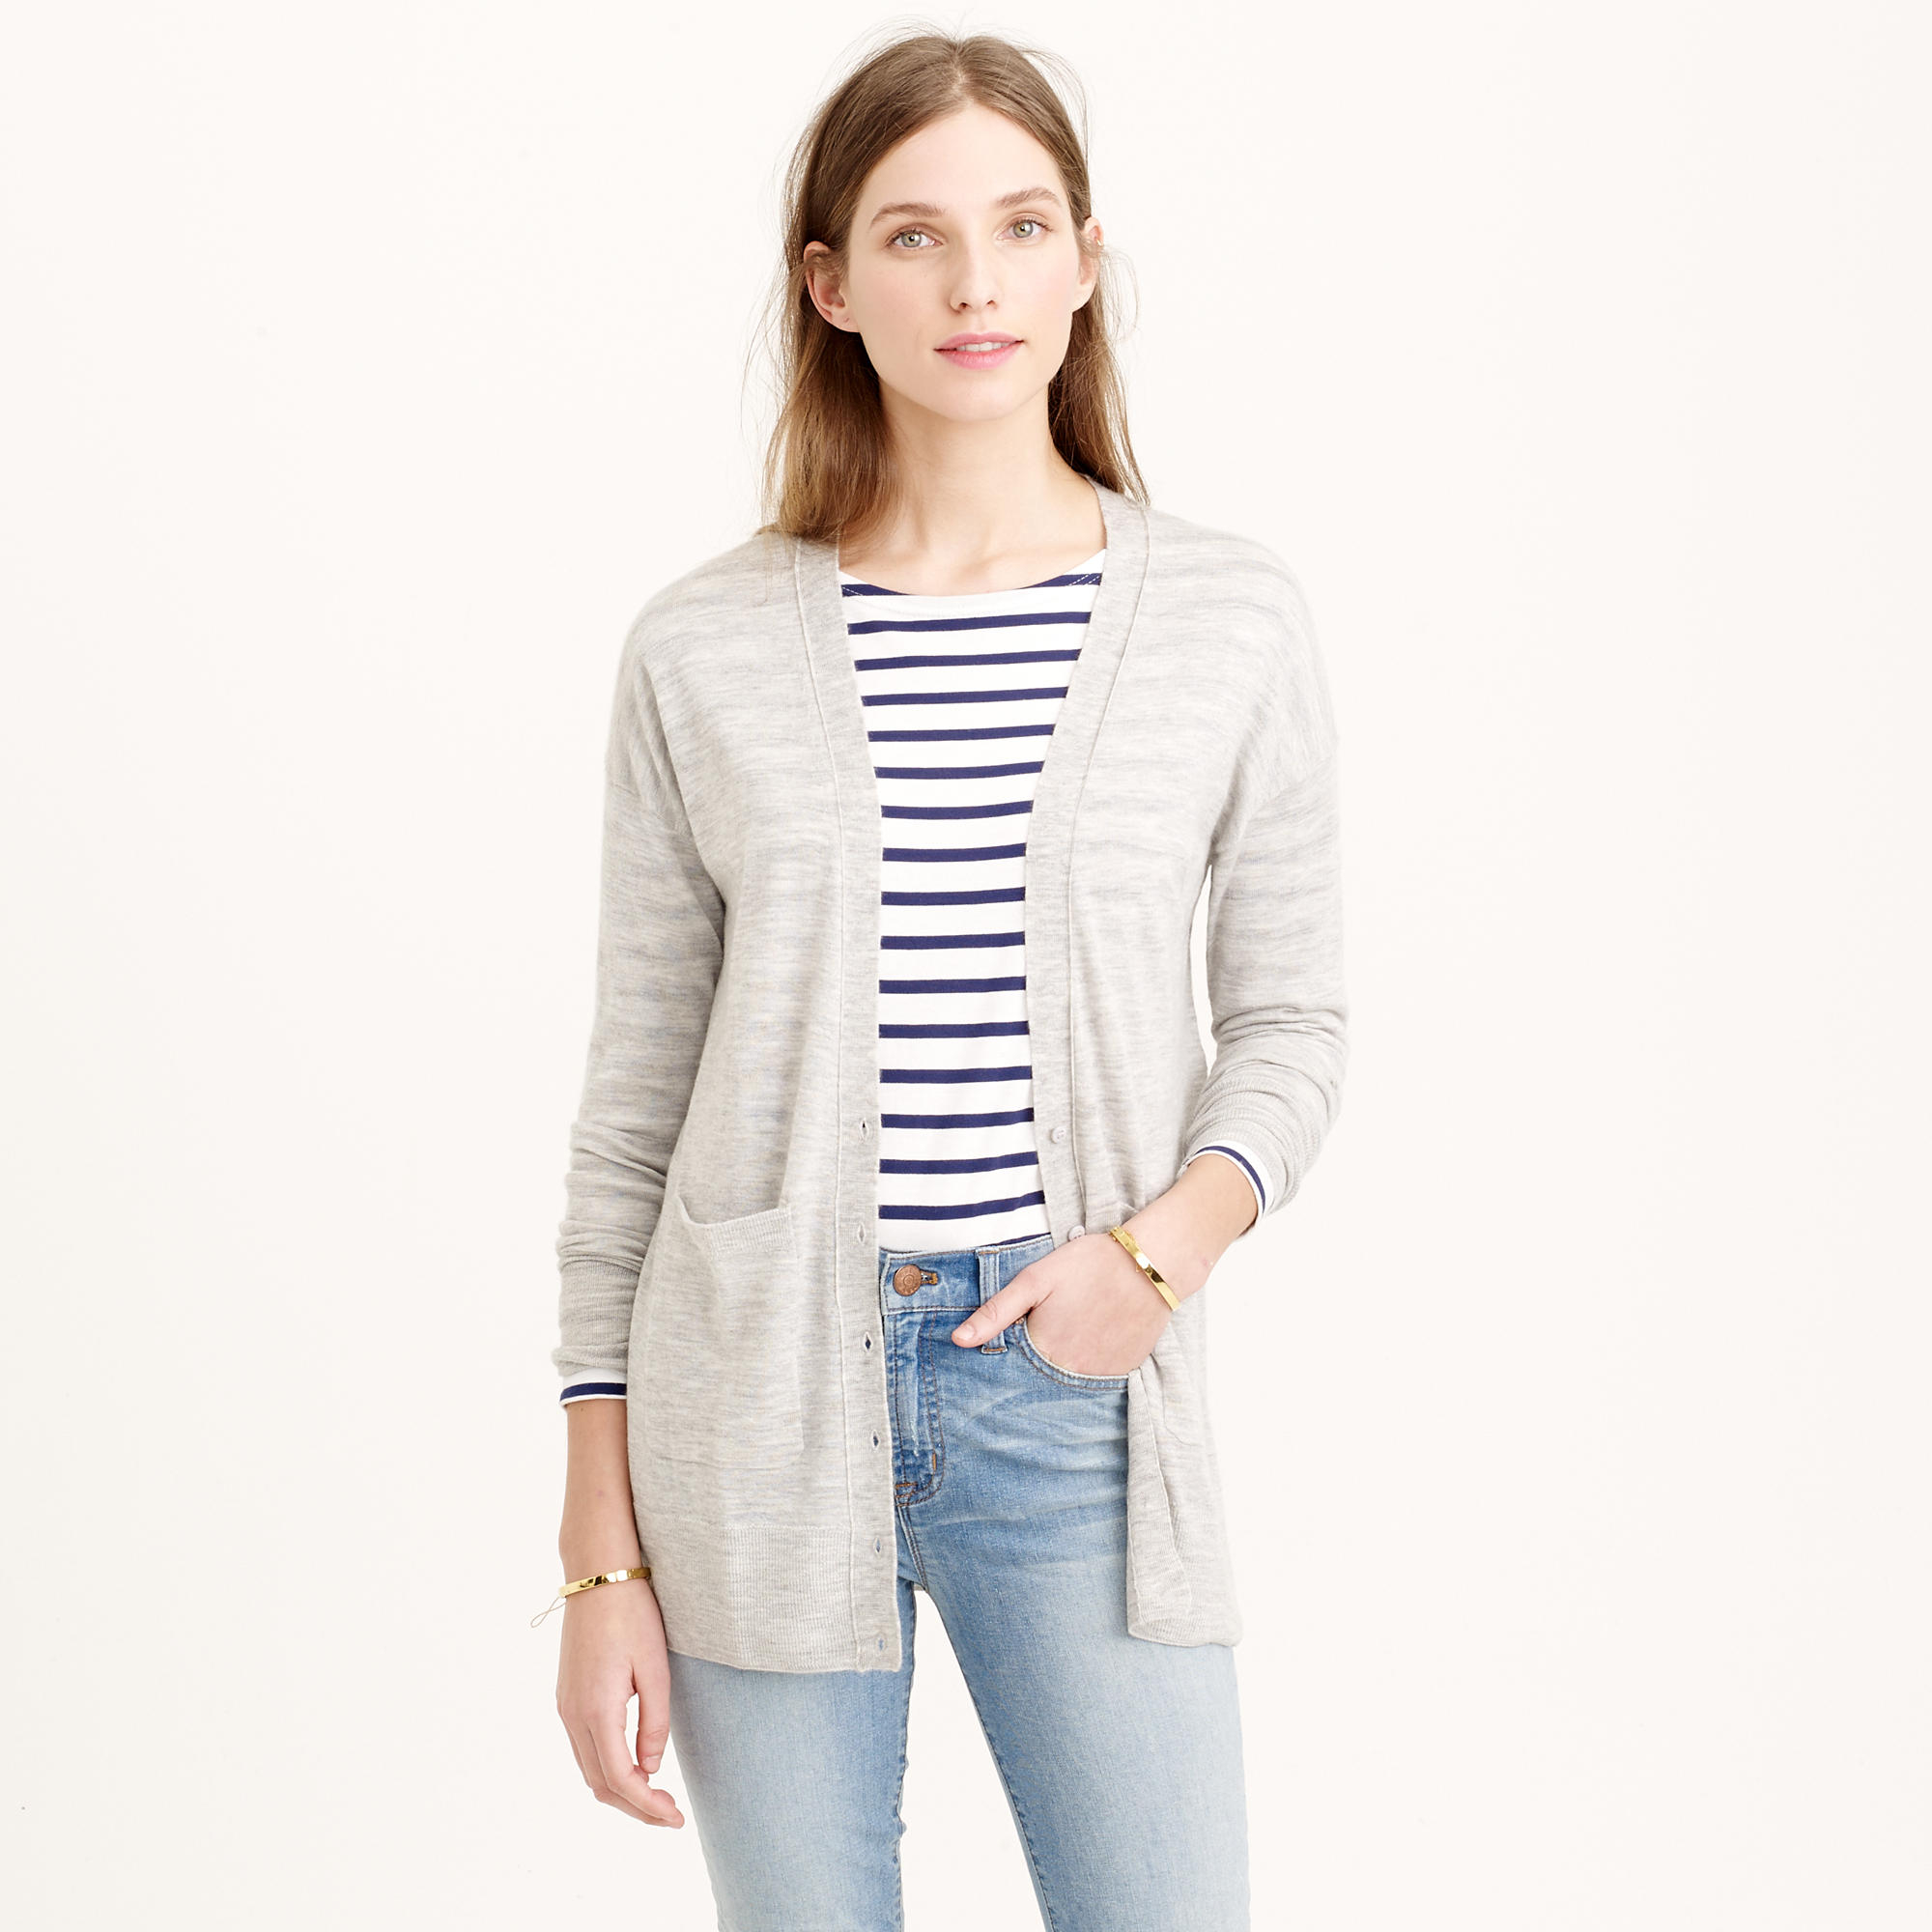 Lyst - J.Crew Collection Featherweight Cashmere Pocket Cardigan Sweater ...